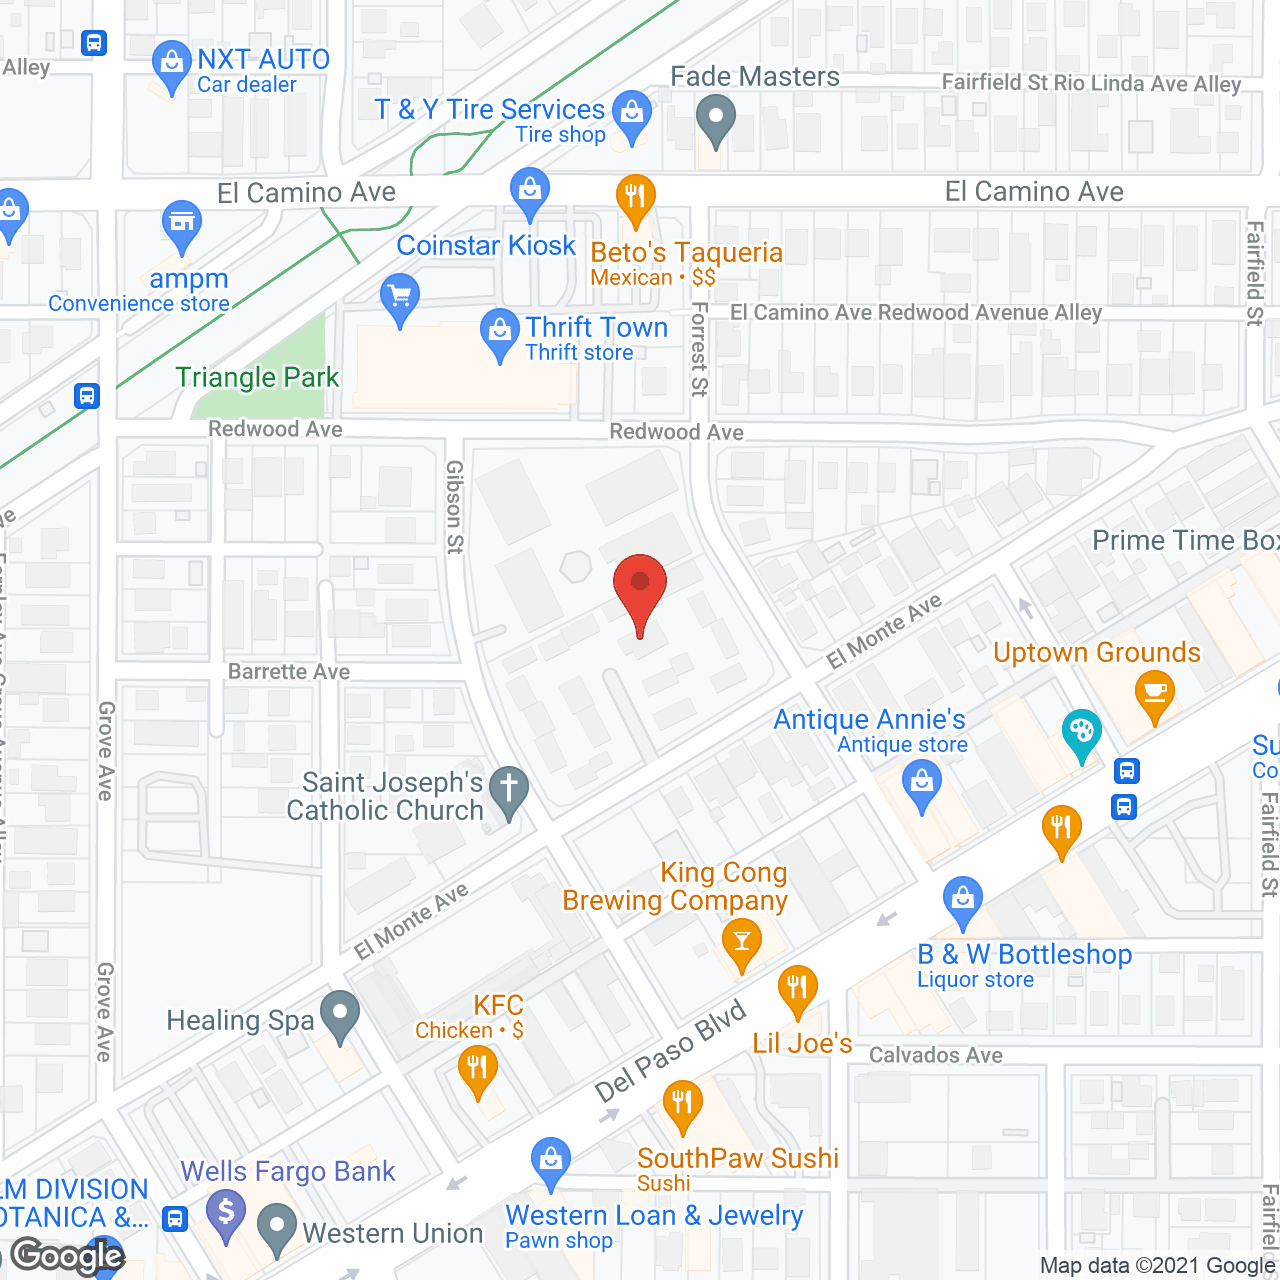 Forrest Palms Senior Ctr Apartments in google map